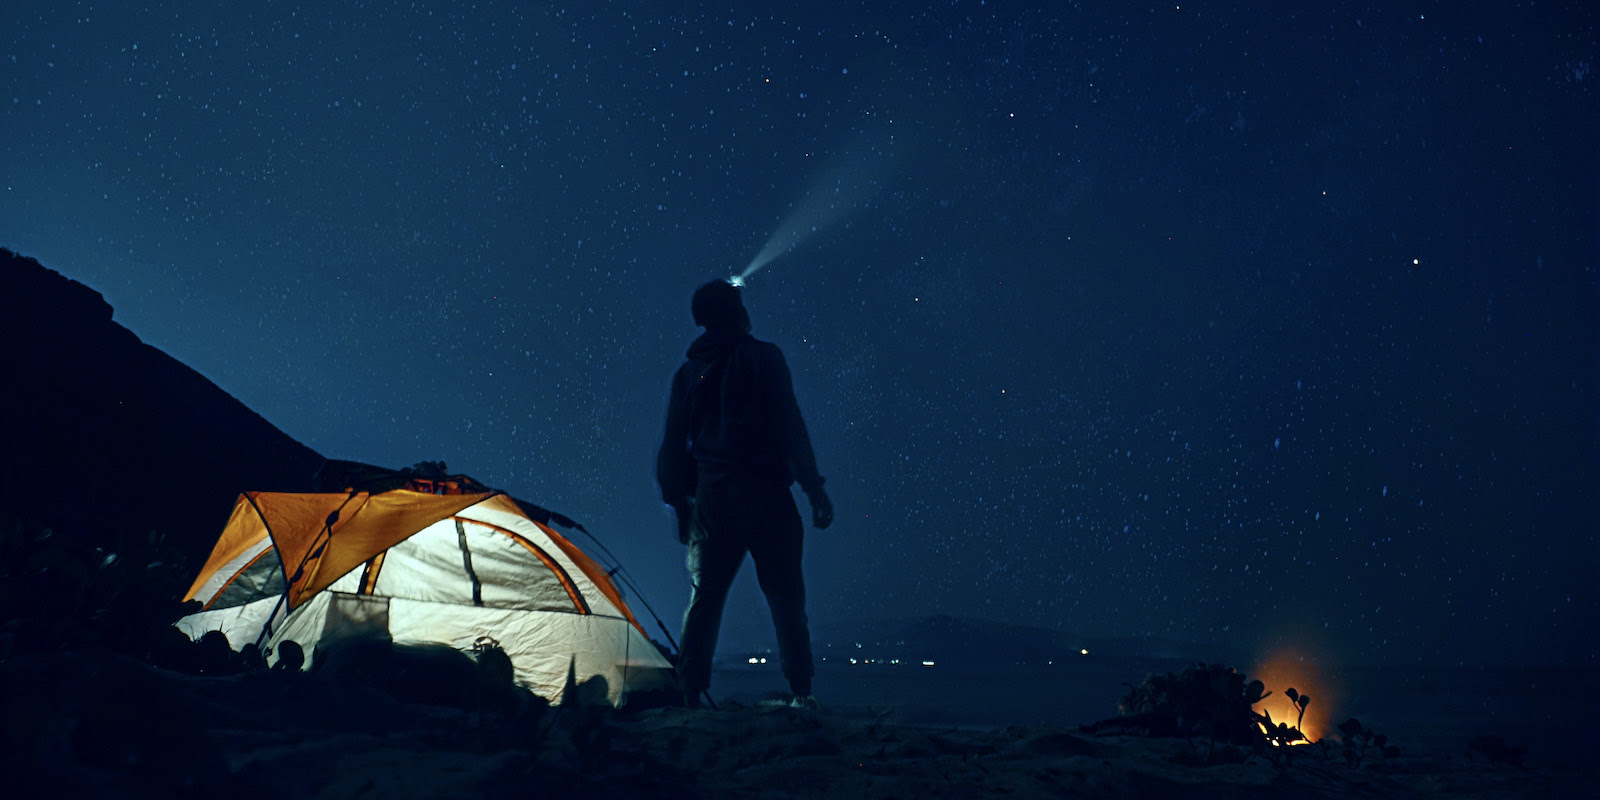 A photograph of a night scene with a tent lit up from inside, a campfire burning down, and a man standing with a headlamp lighting a beam into the dark sky.